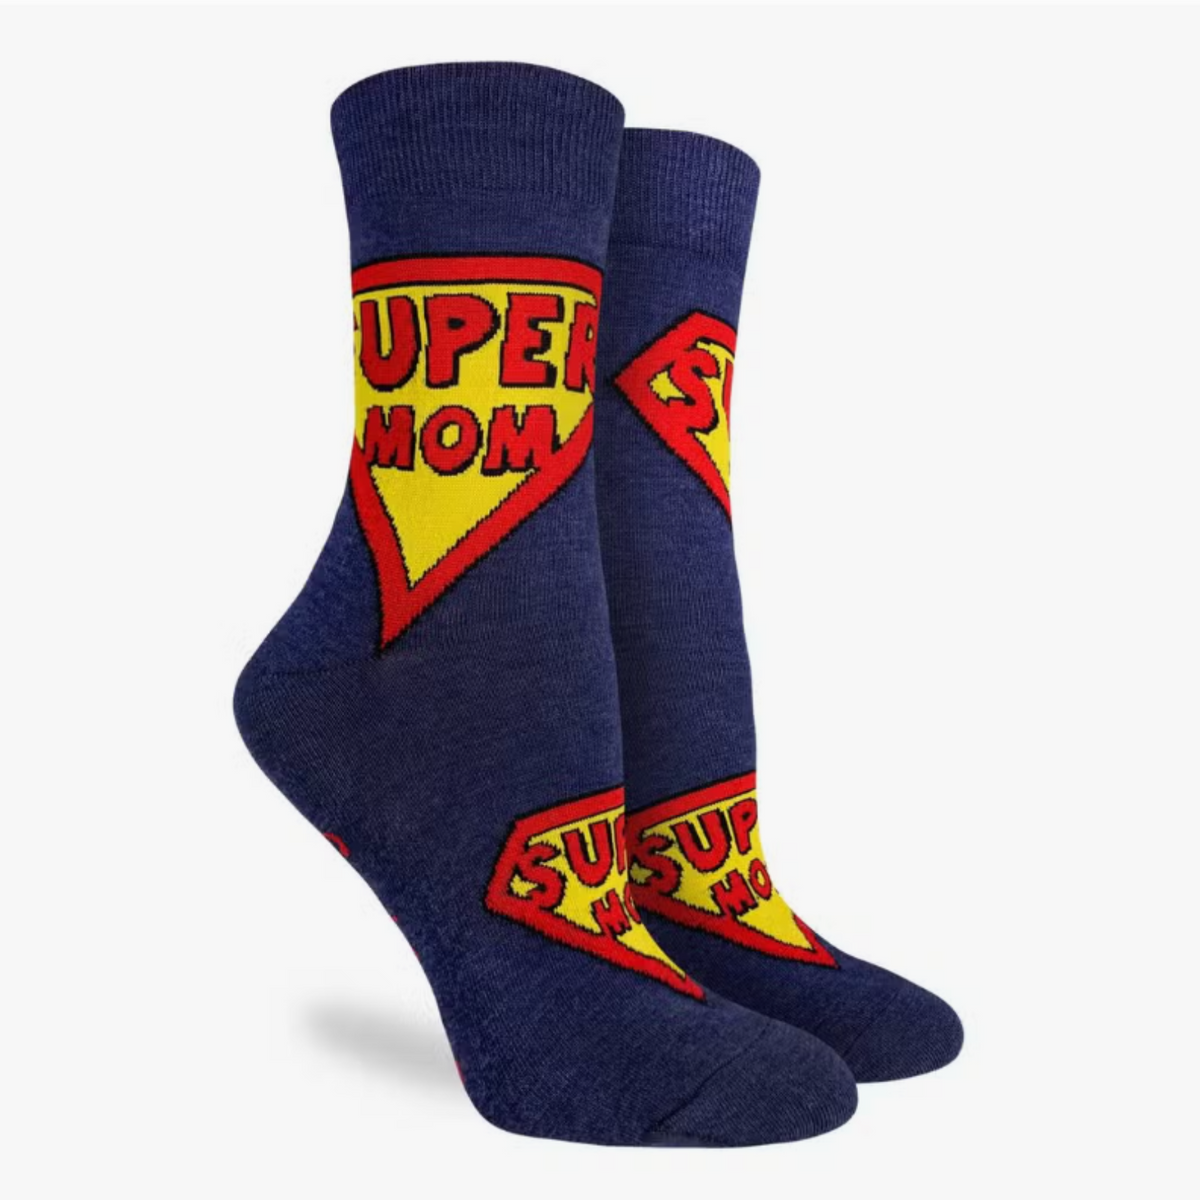 Good Luck Sock Super Mom women&#39;s crew sock featuring navy blue sock with &quot;Super Mom&quot; in red with yellow background on ankle and top of foot. Sock shown on display feet. 